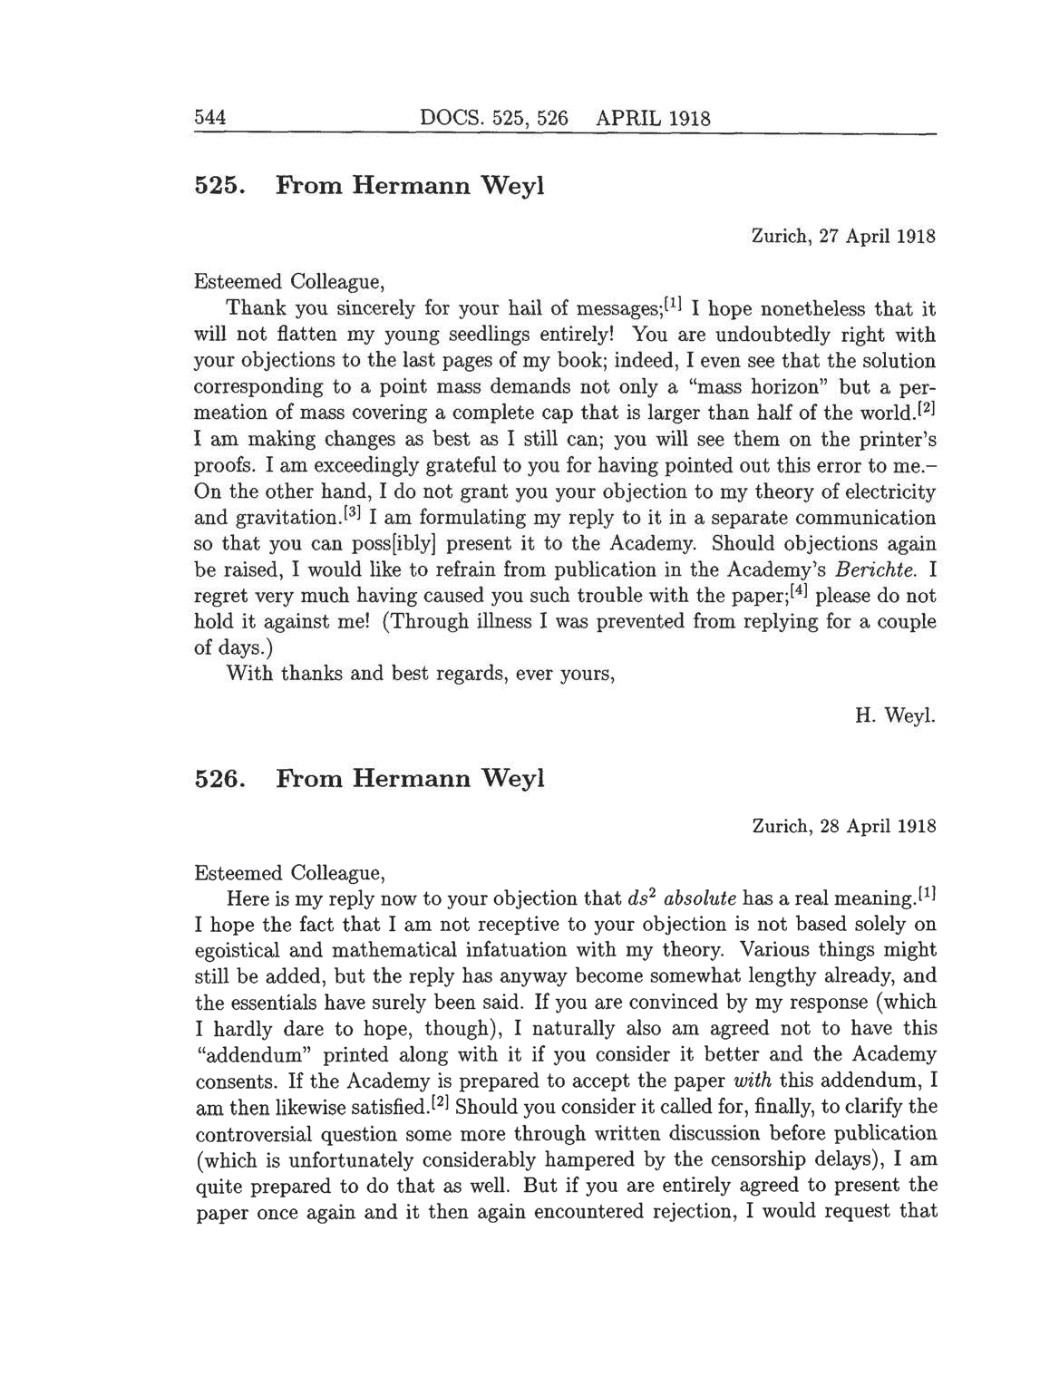 Volume 8: The Berlin Years: Correspondence, 1914-1918 (English translation supplement) page 544